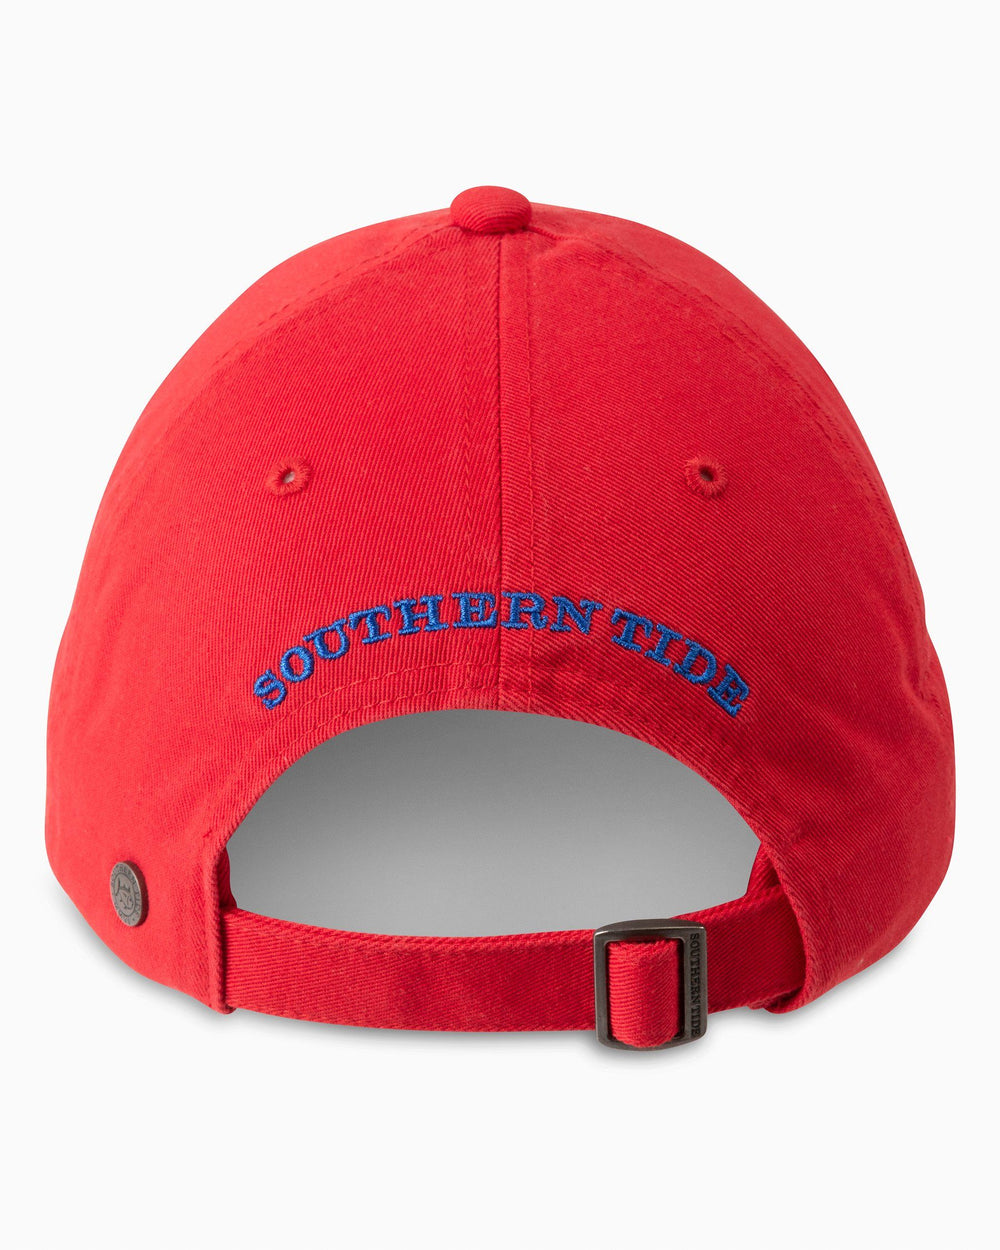 The back of the Skipjack Hat by Southern Tide - Roman Red